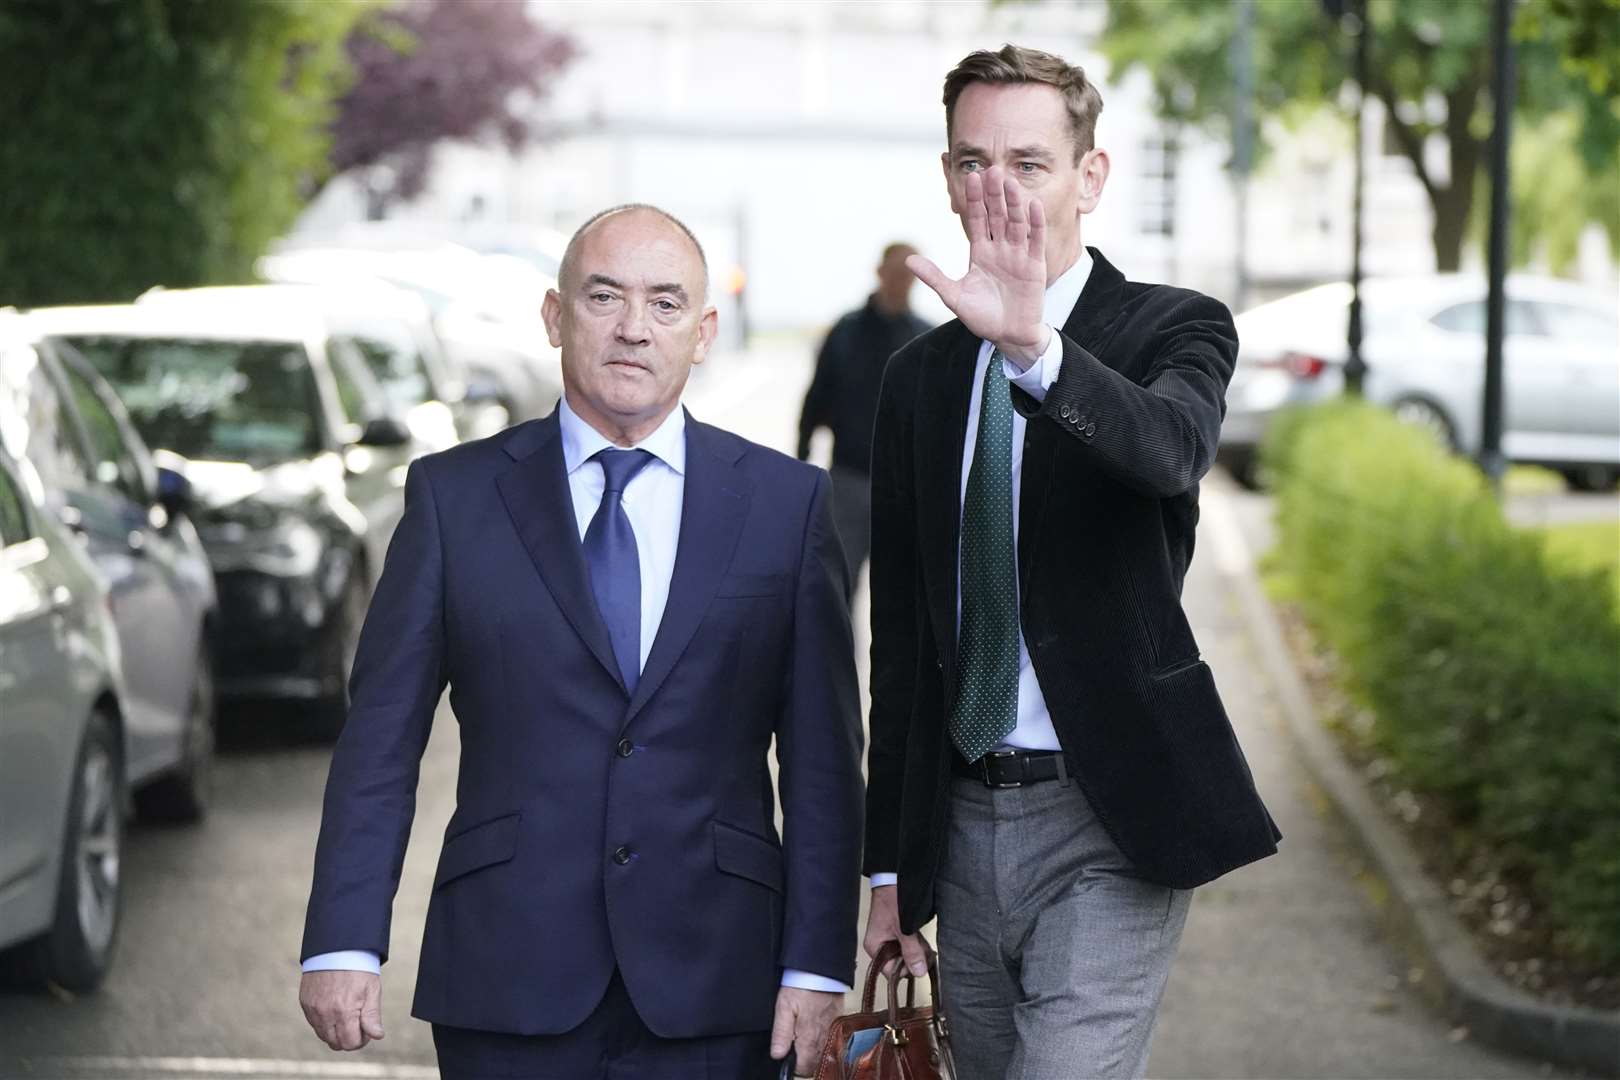 RTE’s highest-paid presenter Ryan Tubridy (right) with his agent Noel Kelly leaving Leinster House (Niall Carson/PA)